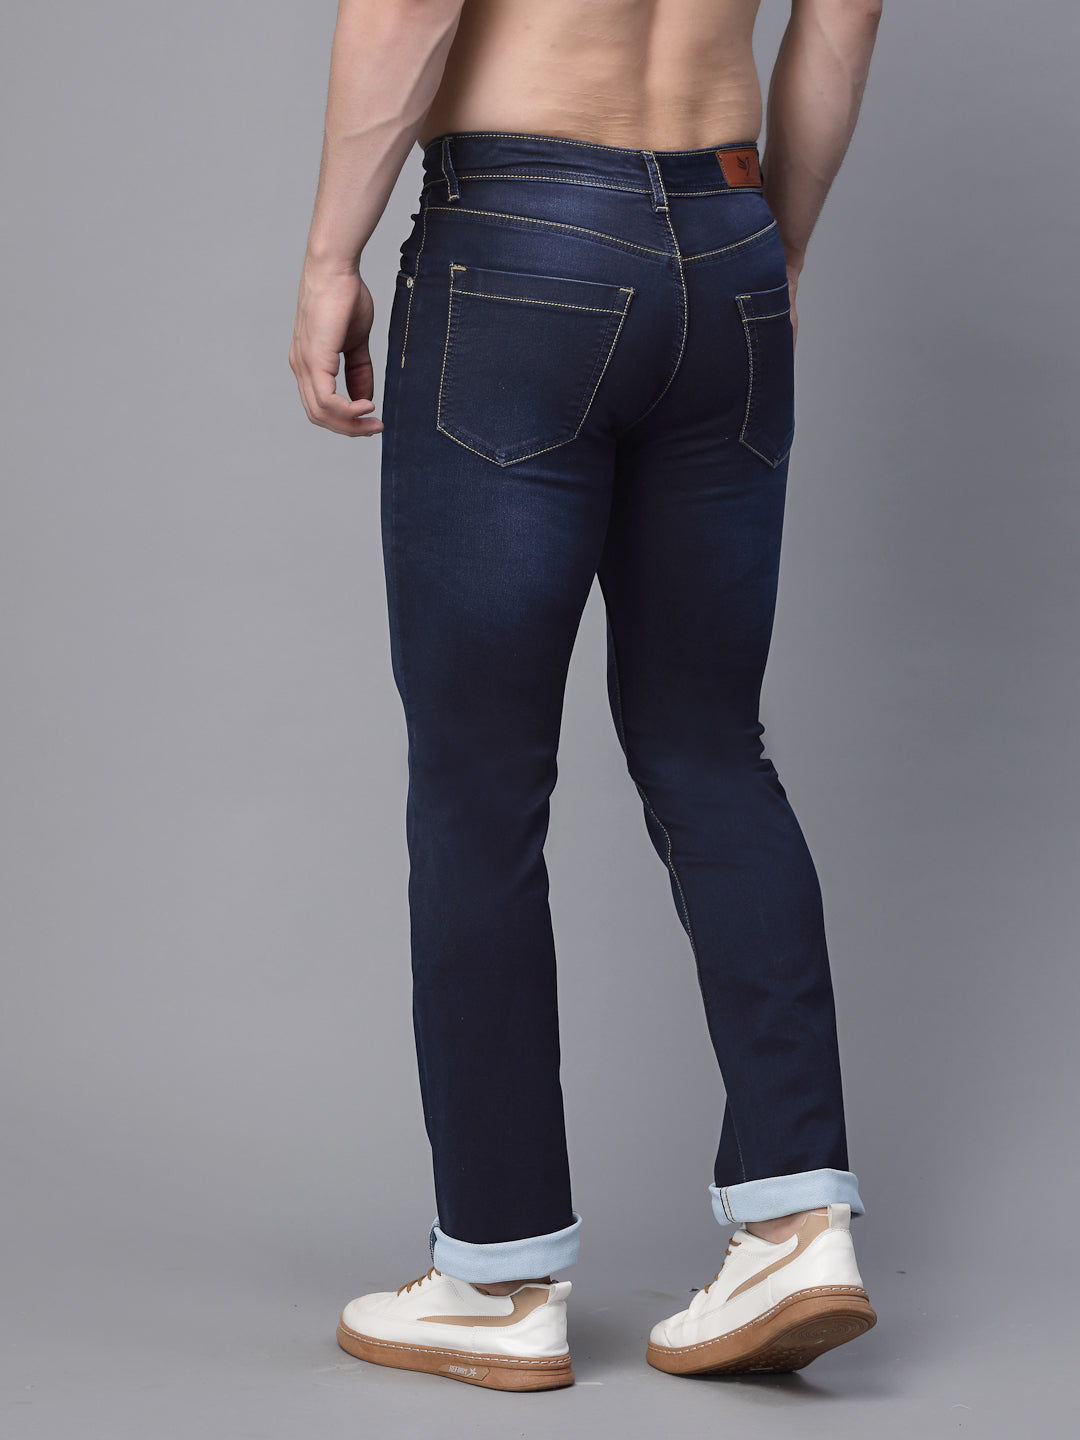 Mens Blue Cotton Solid Rolling up Jeans